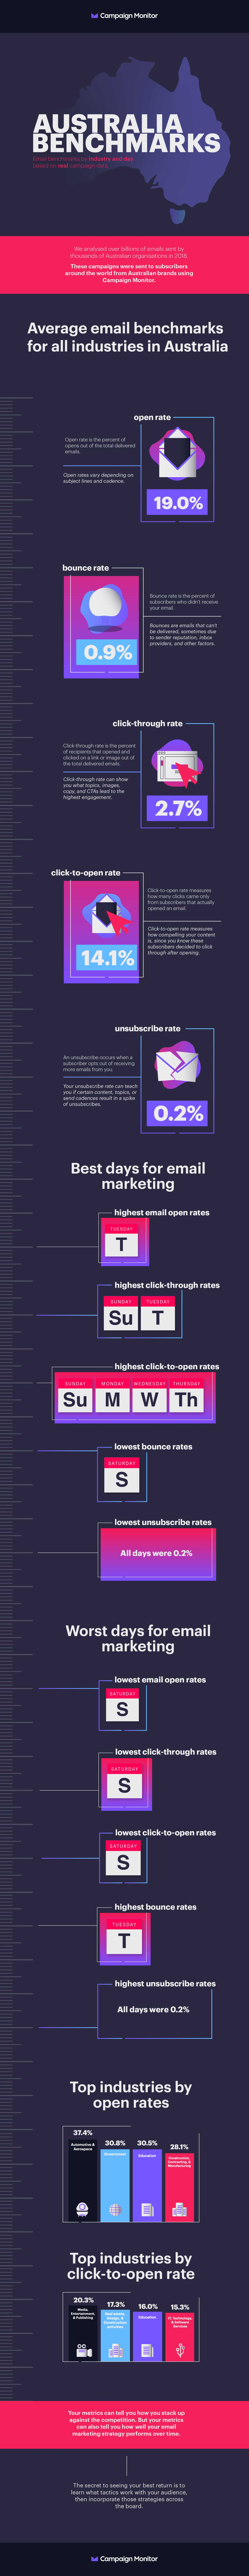 2018 and 2019 Australia Email Benchmarks Infographic